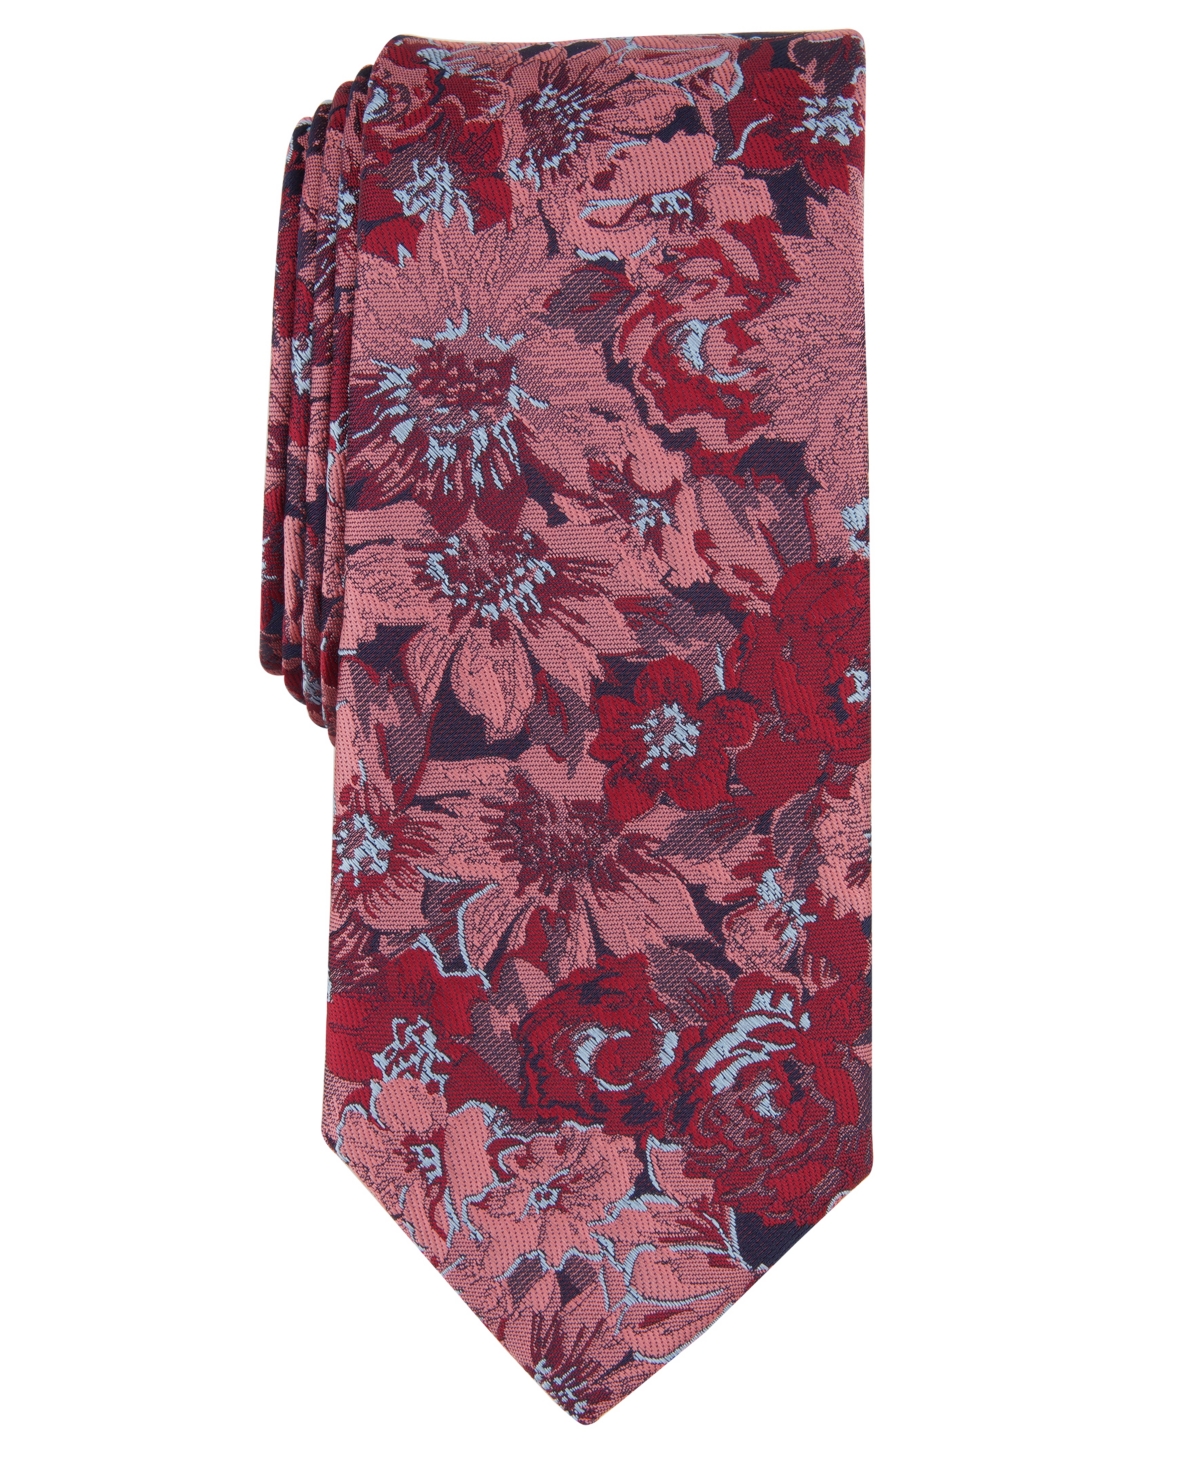 Men's Holladay Floral Tie, Created for Macy's - Red